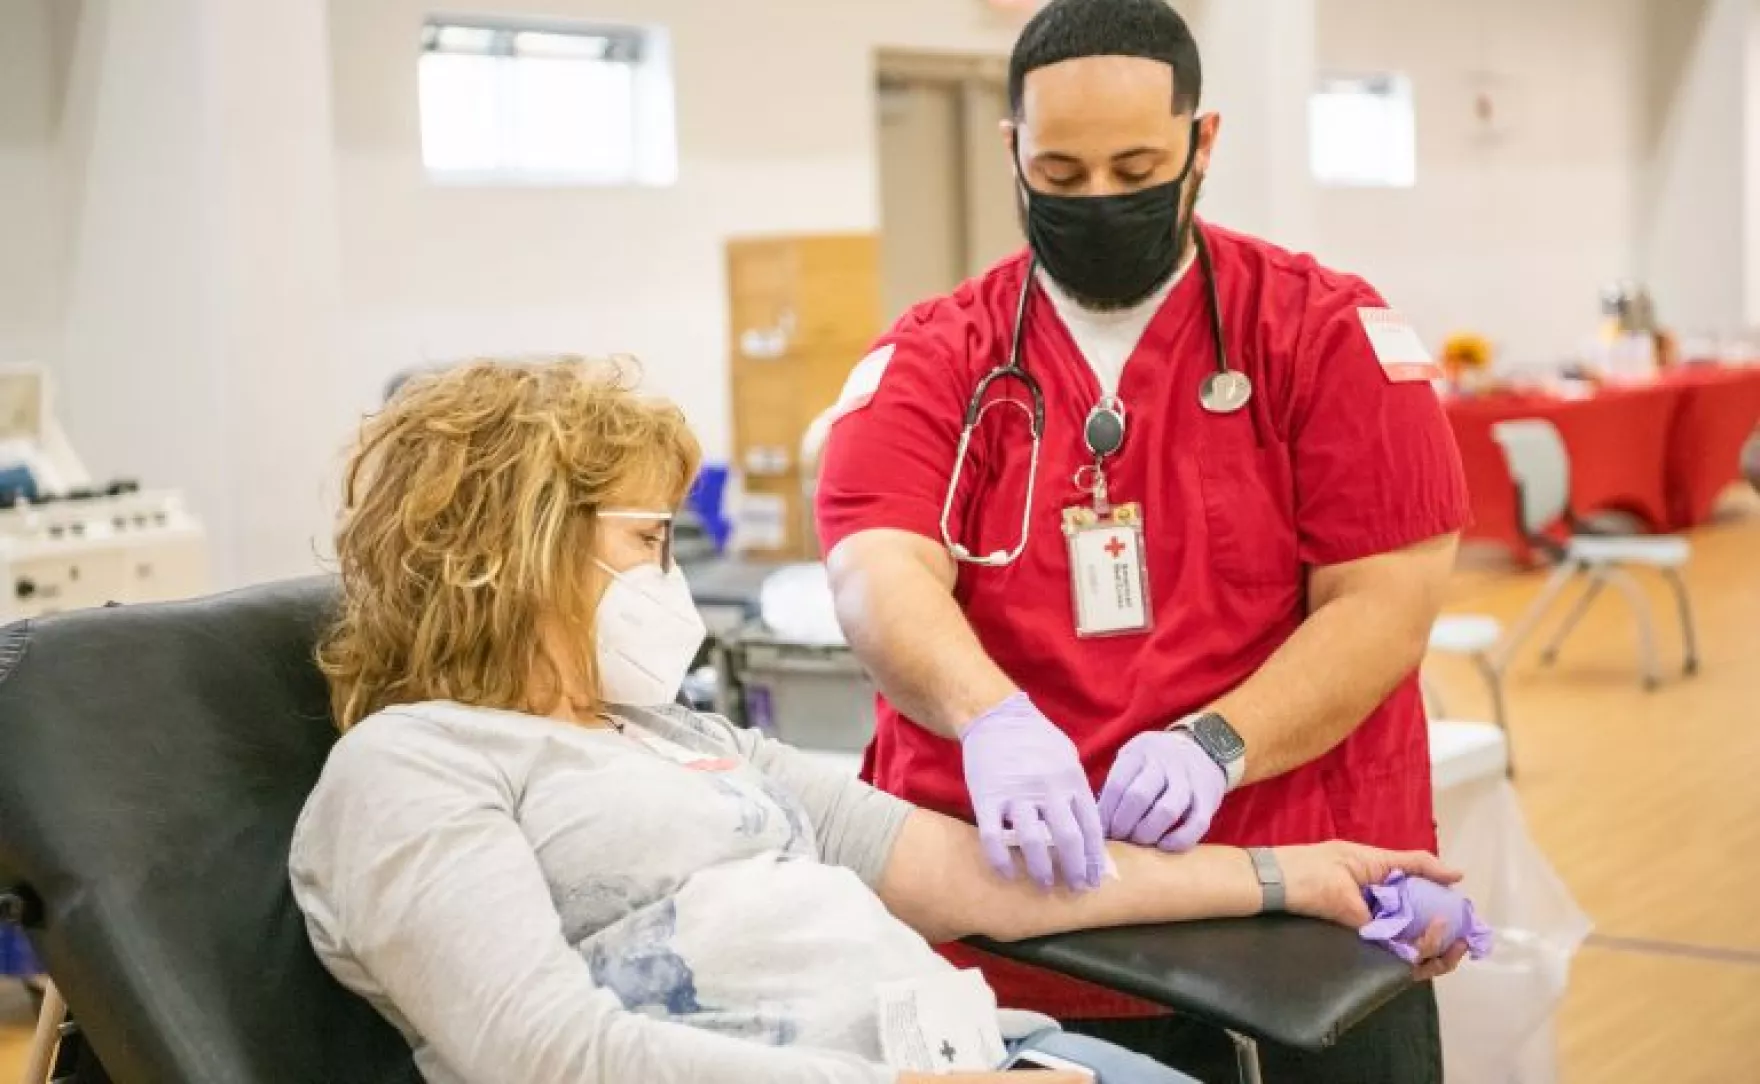 Blood centers across the region are actively recruiting to fill phlebotomist vacancies as blood supplies run low.